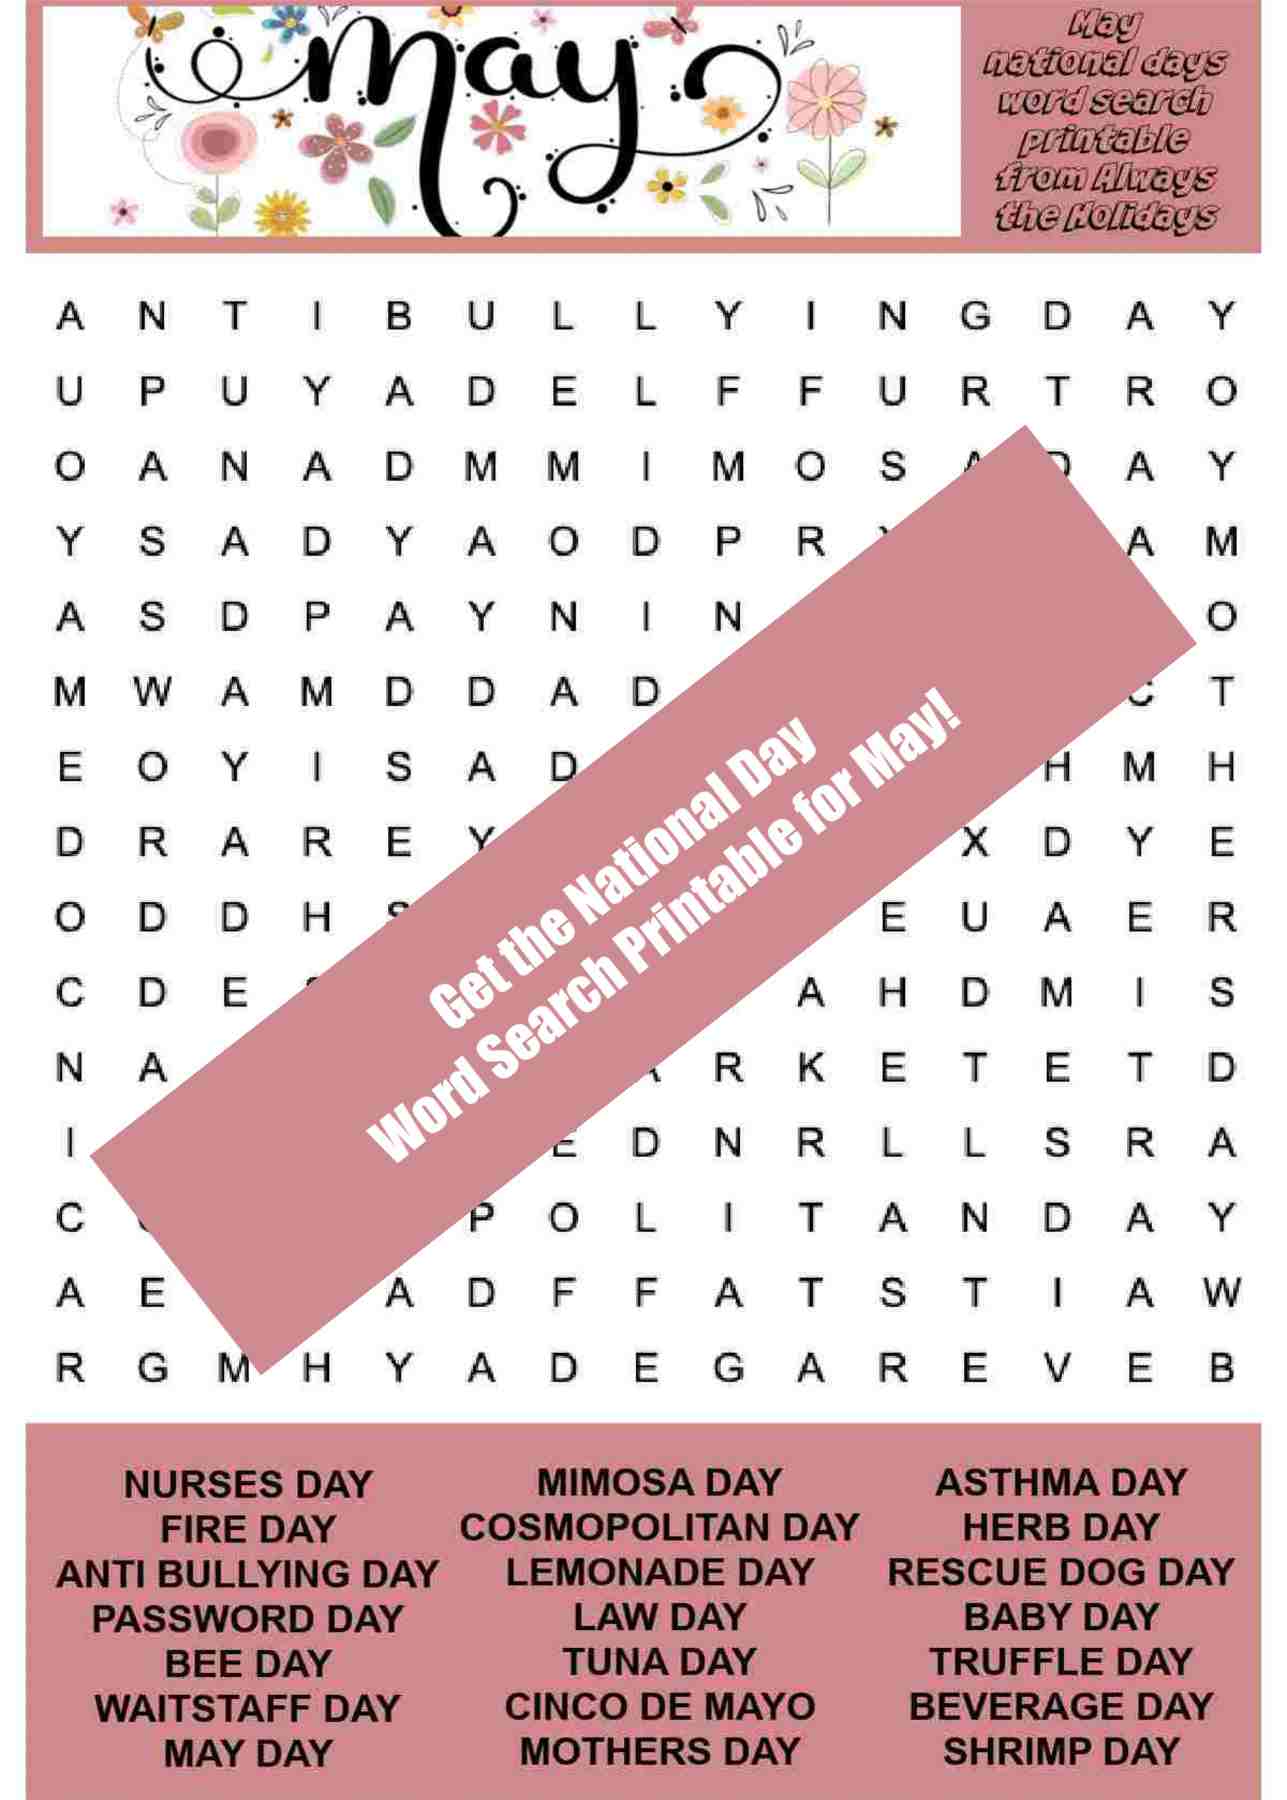 A May word find puzzle for the national days in May, with a banner that says Get the national day word search printable for May.